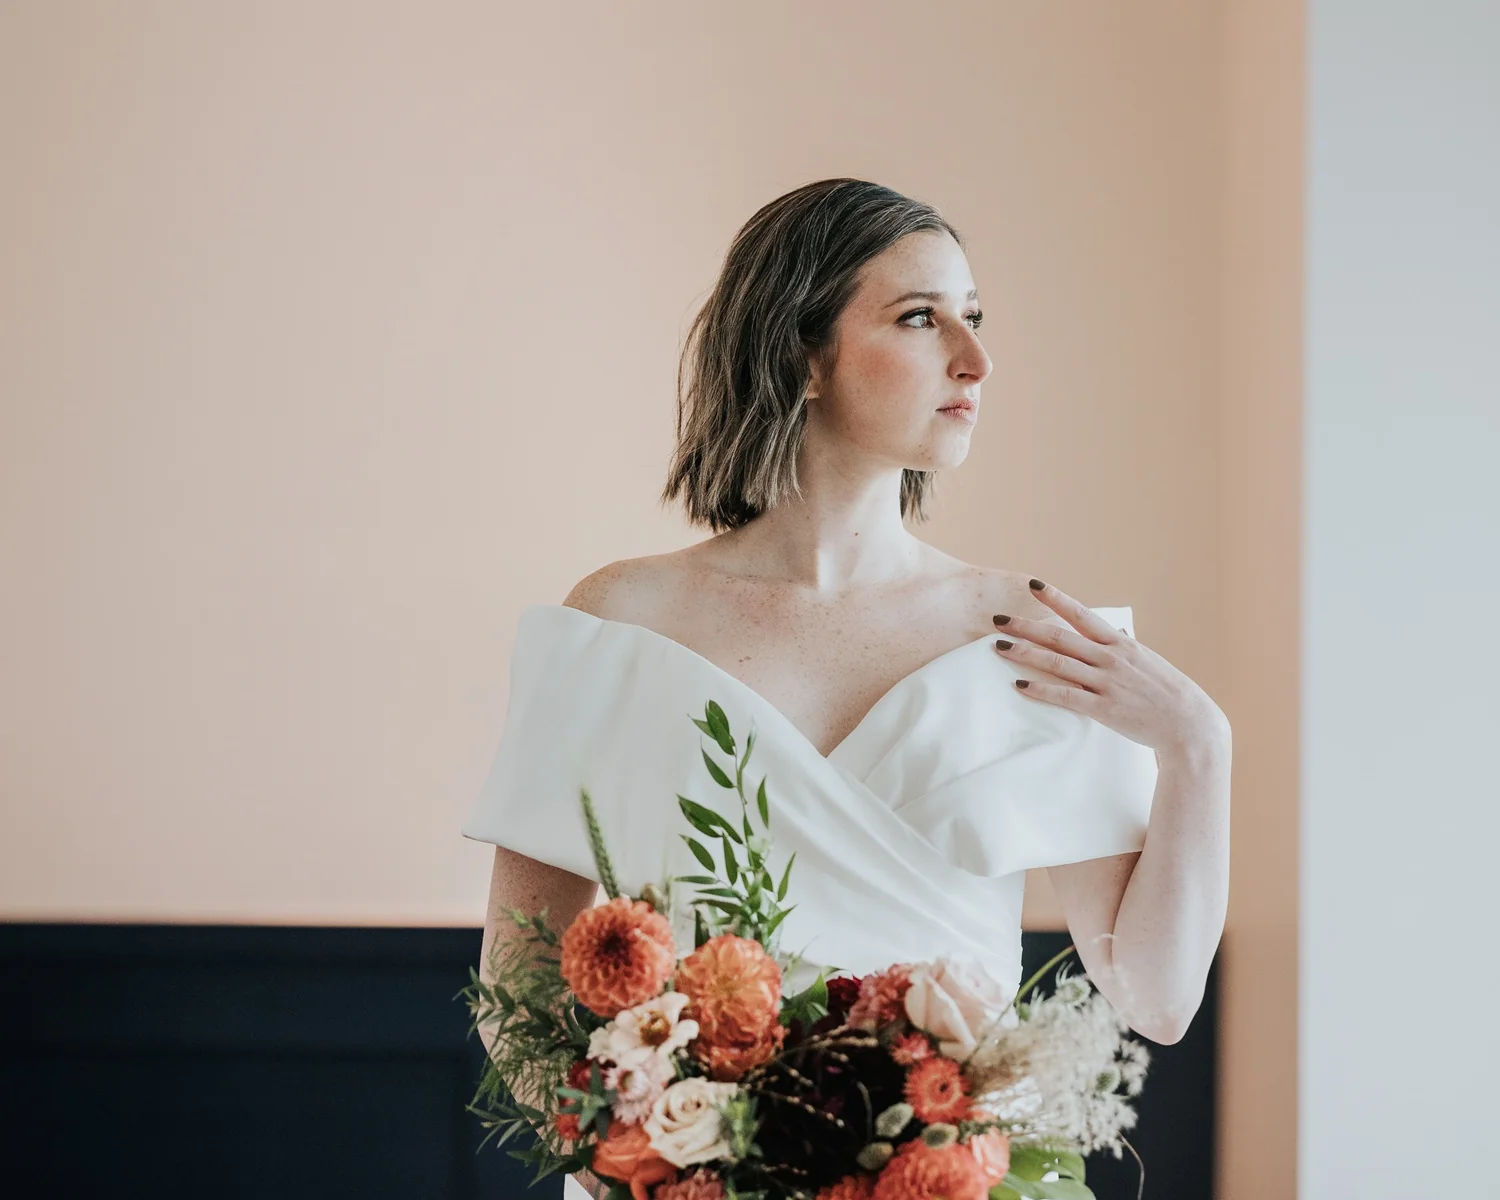 A person in a white dress holding a bouquet of flowers in a Town at Trilith wedding reception space